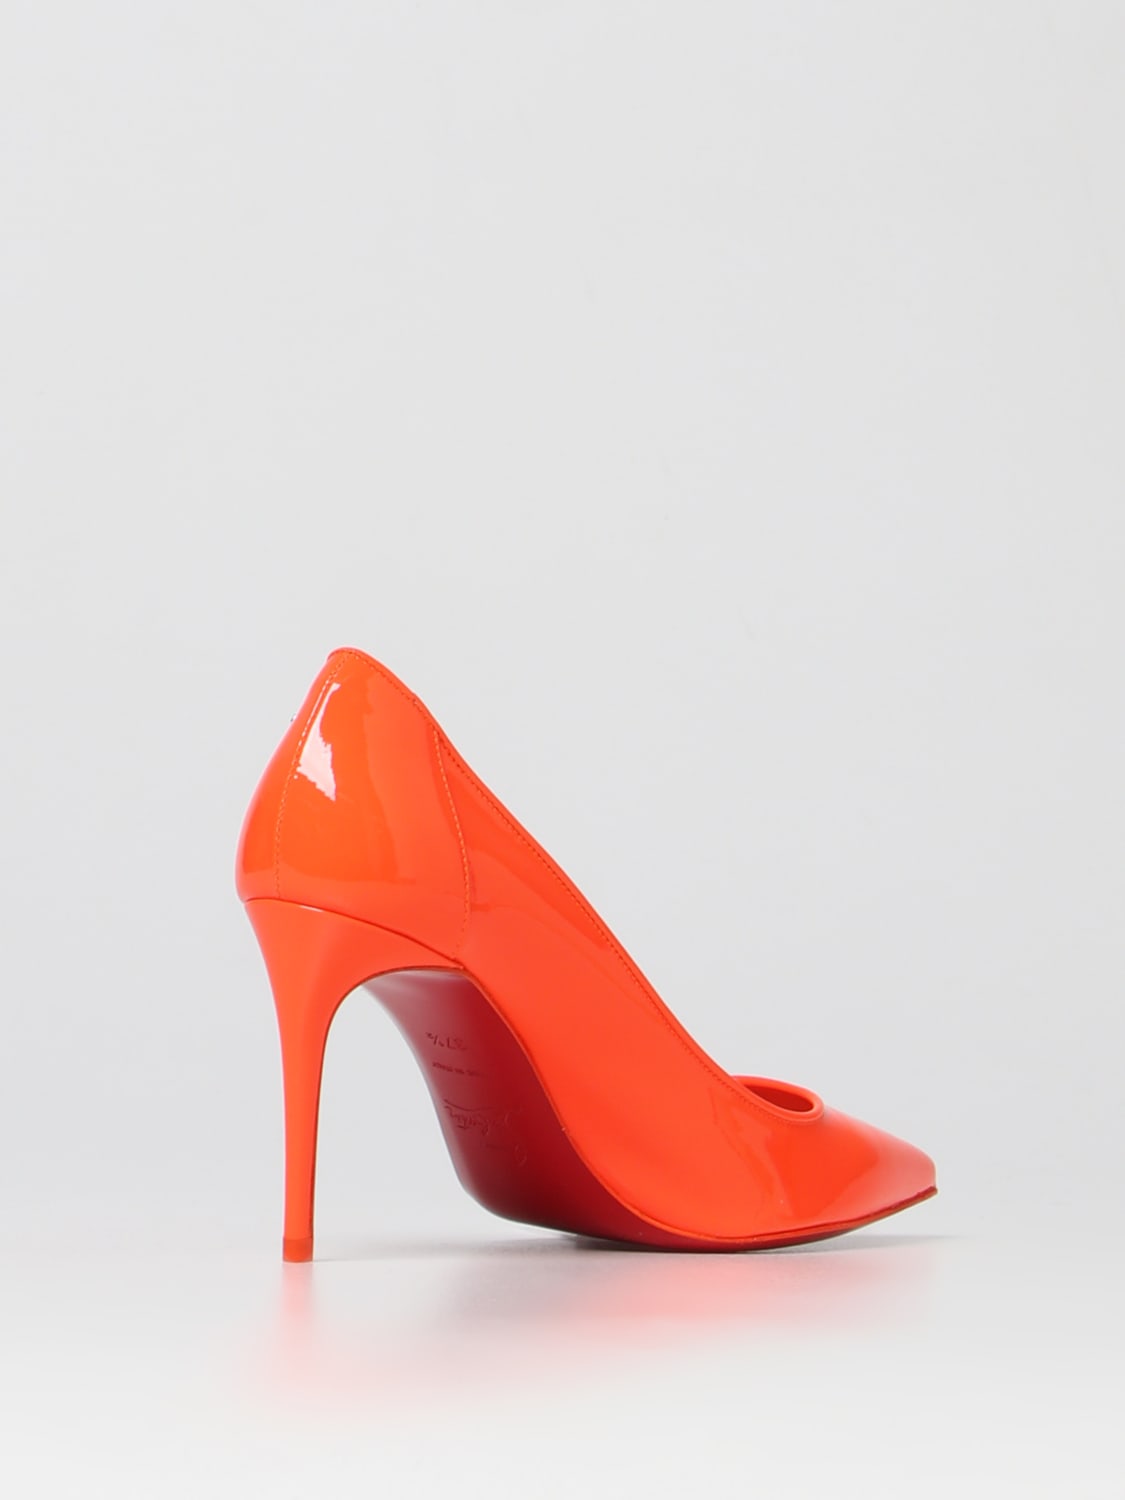 Christian Louboutin Kate Pointed Toe Patent Leather Pump (Women